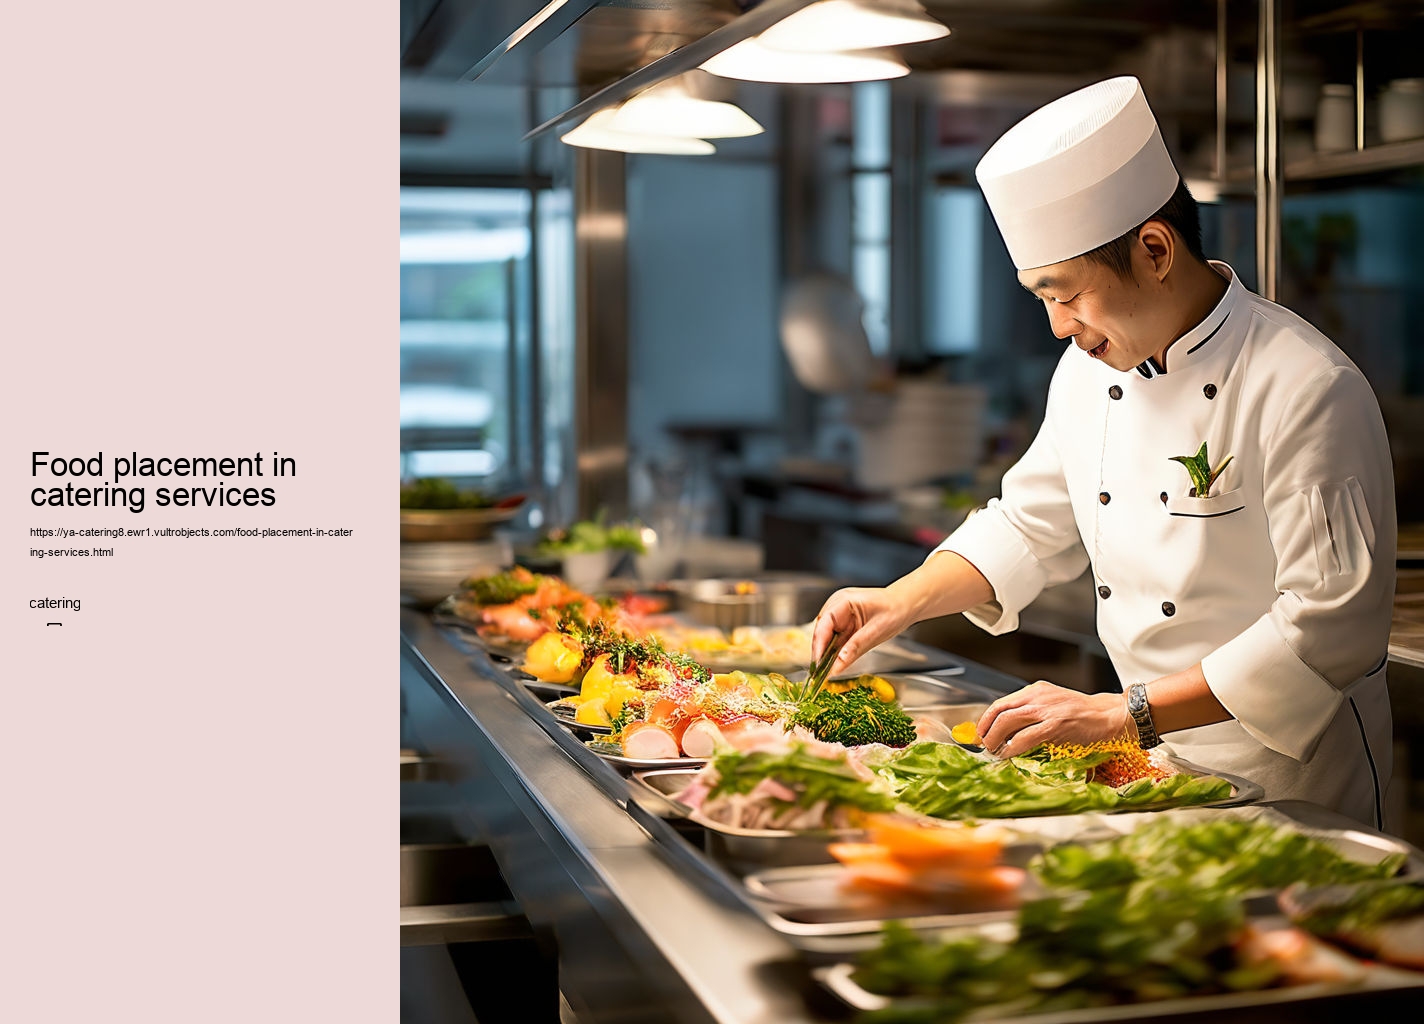 Food placement in catering services